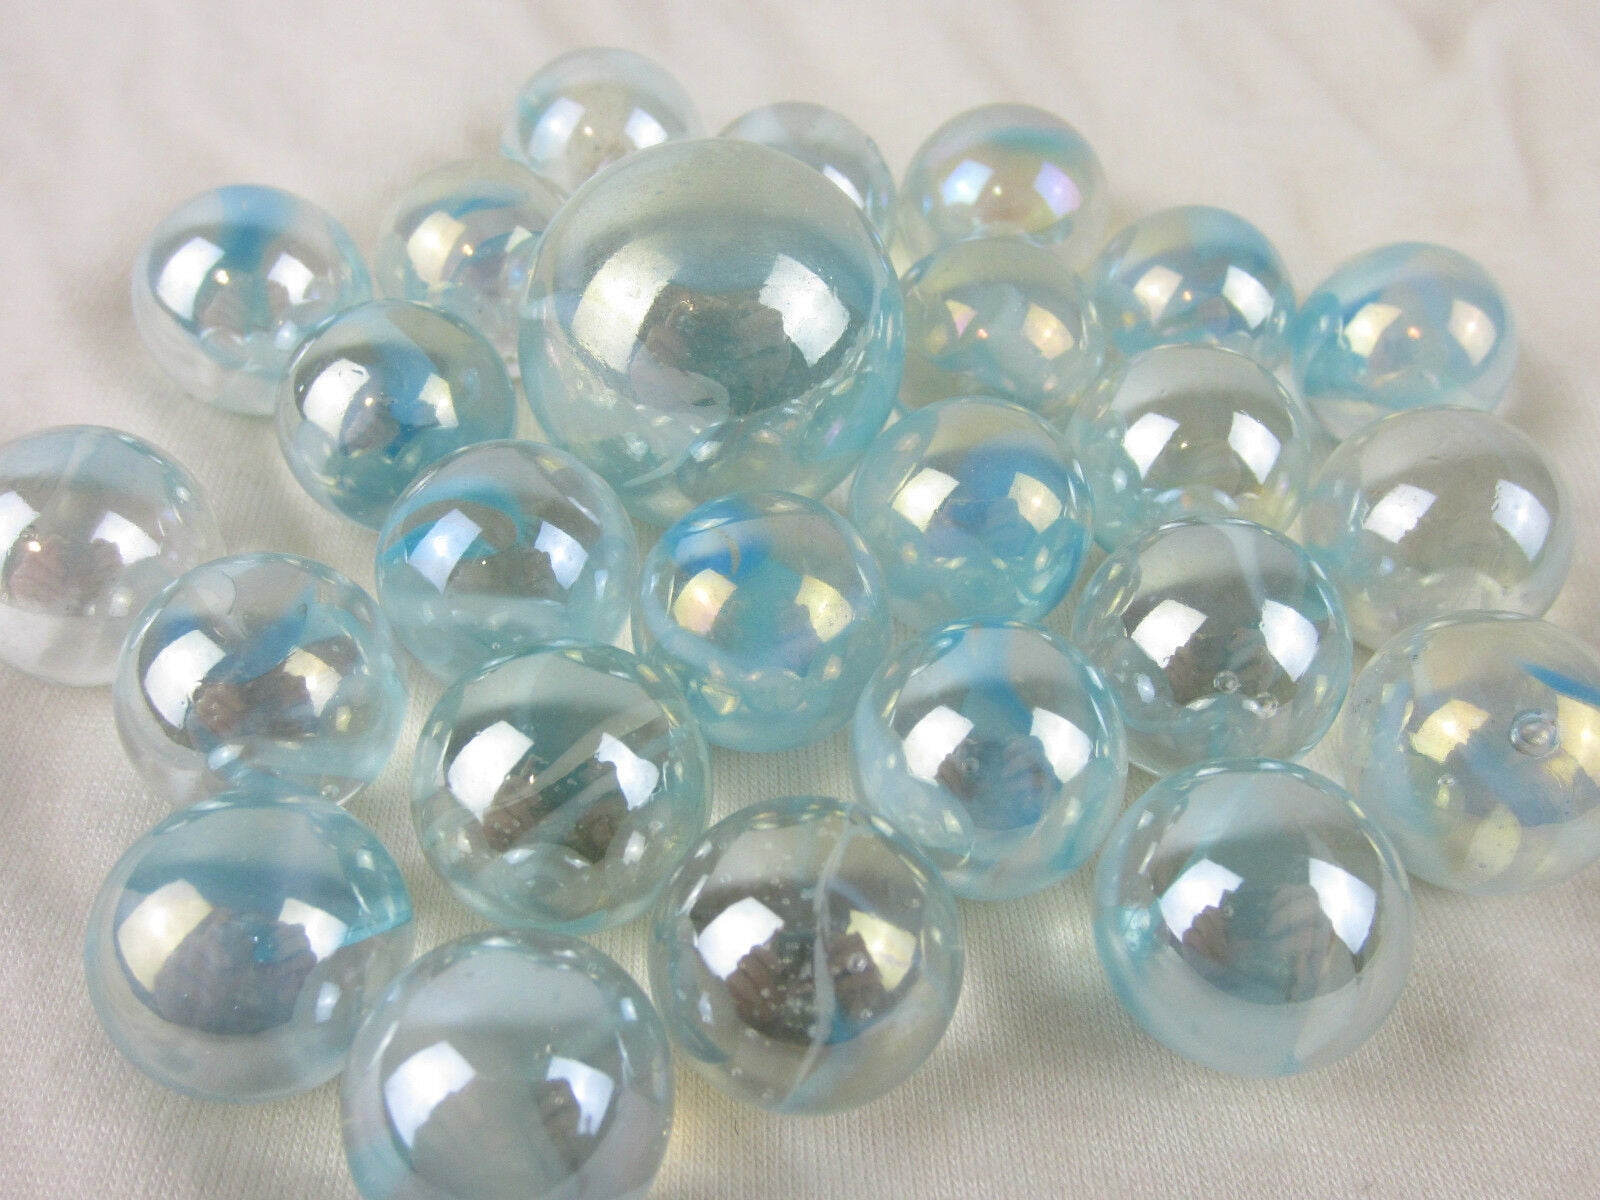 25 Glass Marbles SEA TURTLE Sea Blue/Green Translucent Game Pack Shooter Swirl 